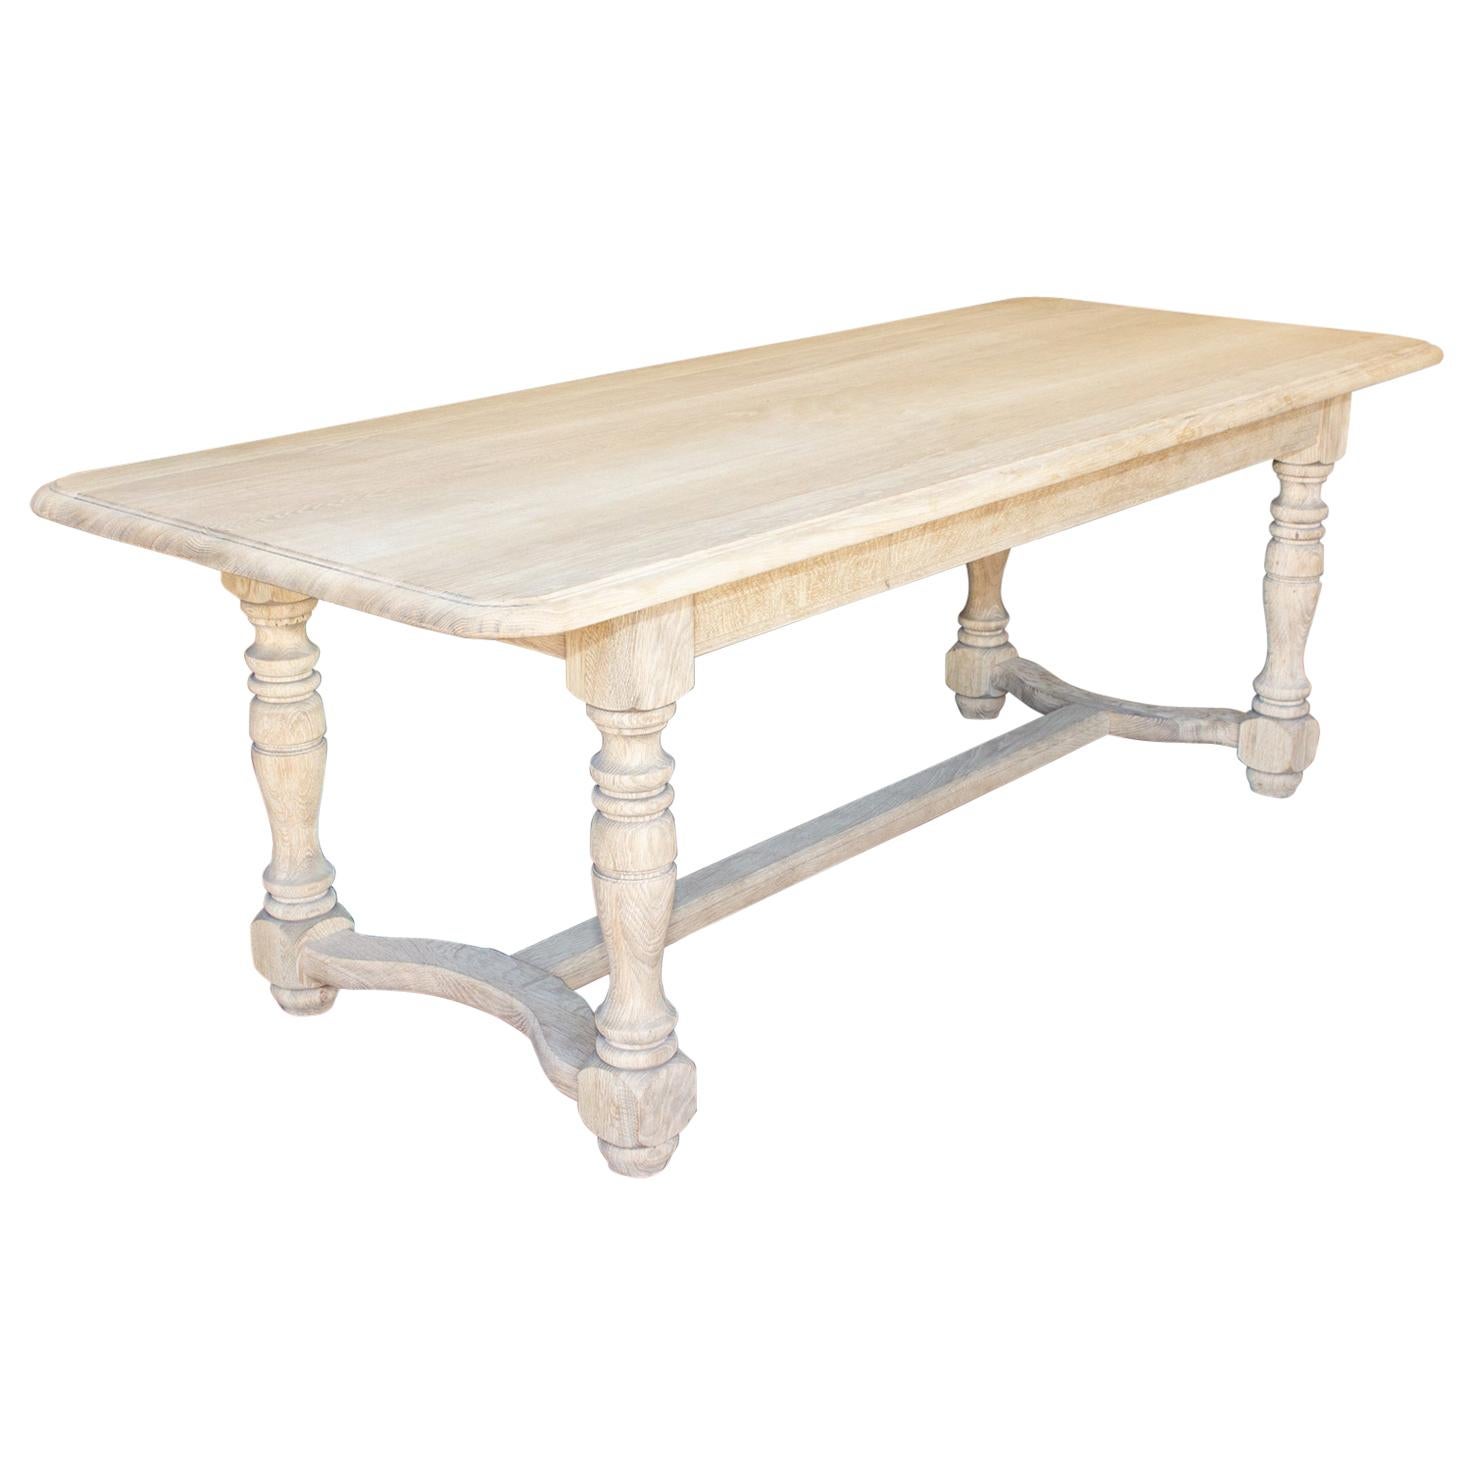 Stripped Antique French Oak Table with Hand Carved Details and Beveled Edge Top